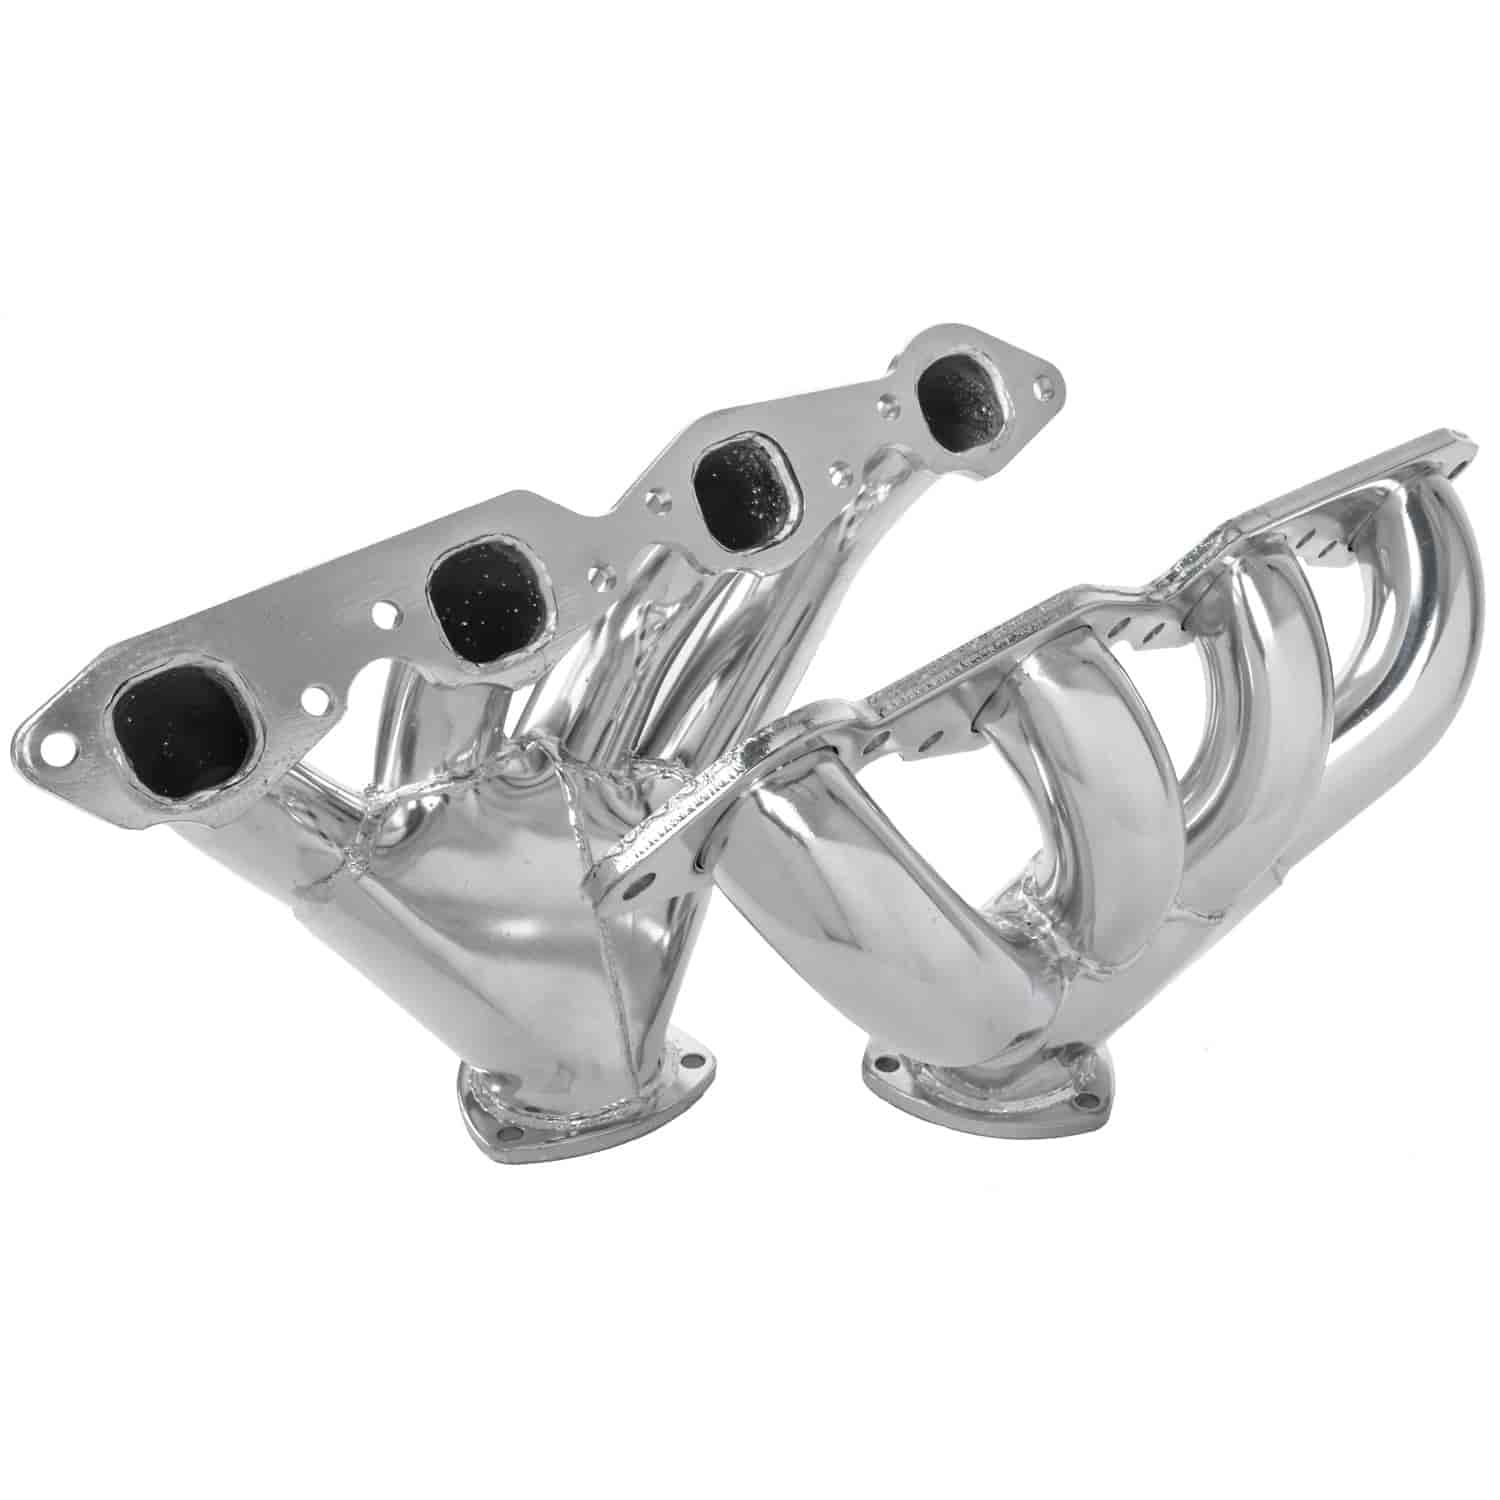 Street Rod Tight Tubes Headers For Chevy 396-502